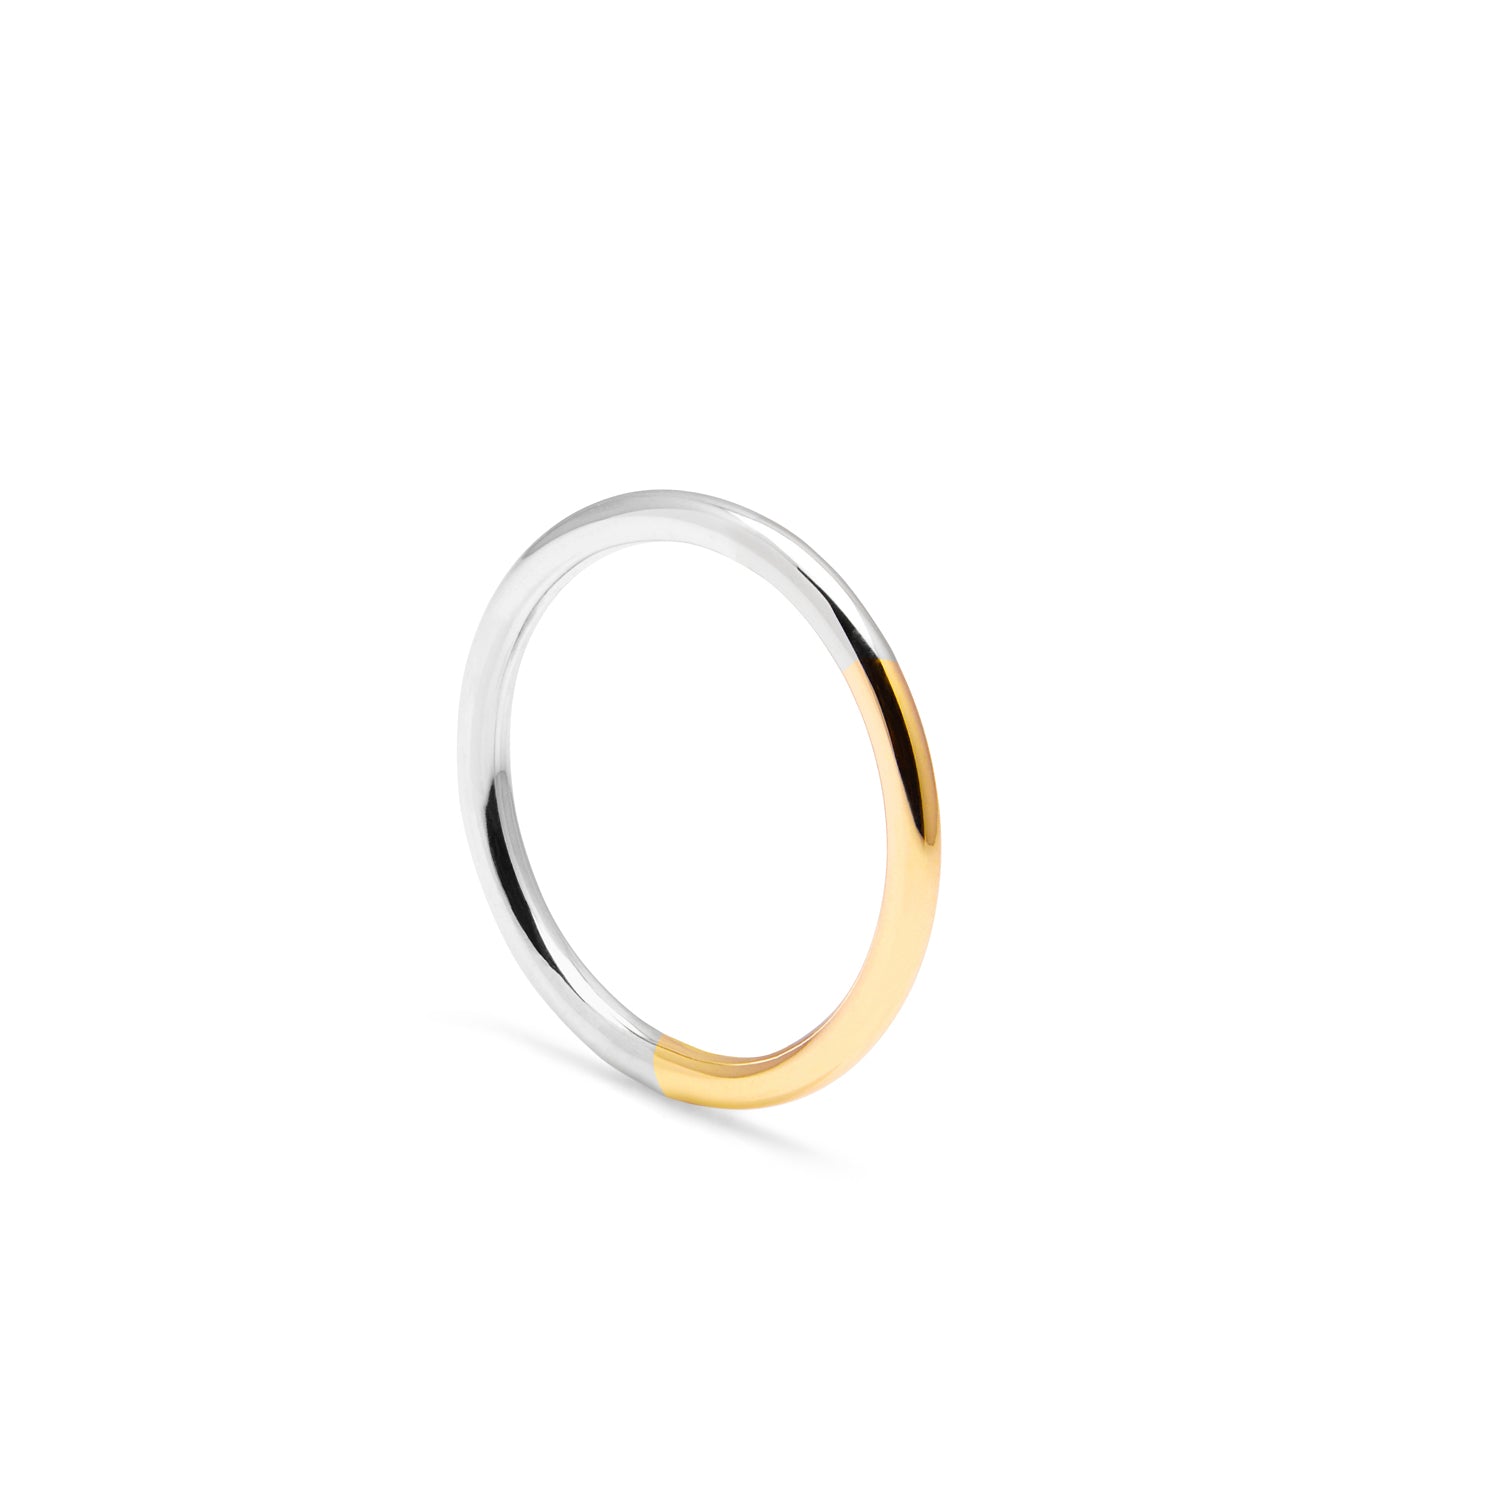 Golden Ratio Band - 9k Yellow Gold & Silver